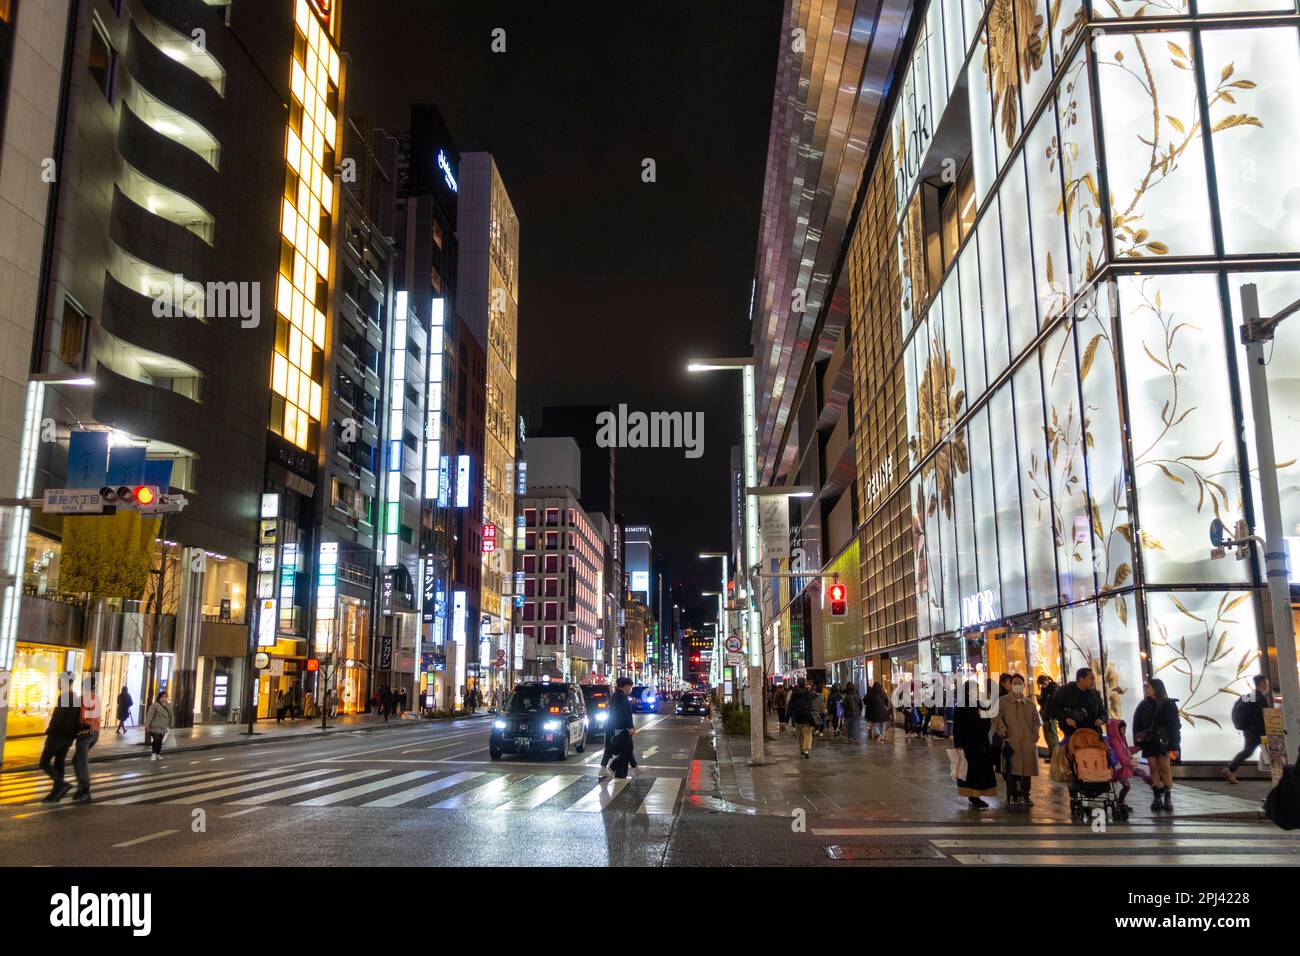 Evening view along futuristic shopping street in Ginza shopping district, Tokyo, Japan Stock Photo